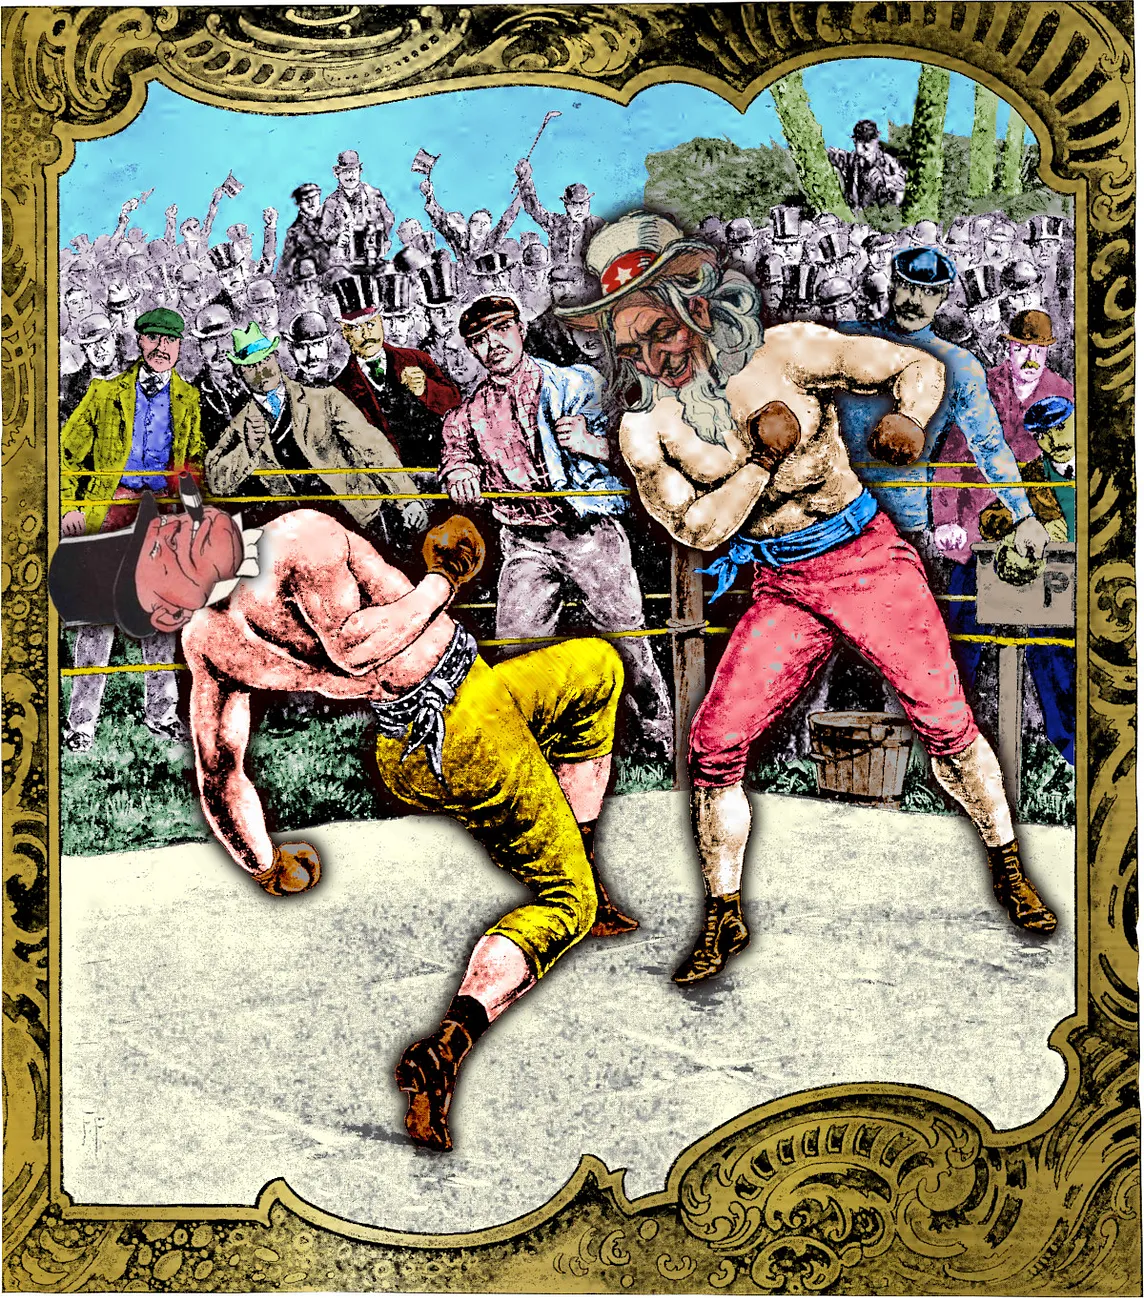 A 1901 cover of FAMOUS FIGHTS magazine, an engraving depicting an outdoor boxing ring in which a triumphant boxer has knocked his opponent back into the ropes. A crowd of old-fashioned men crowd around the fight and cheer. The image has been altered. It has been colorized in false watercolor tones. The head of the triumphant boxer has been replaced with a grinning Uncle Sam. The head of the vanquished boxer has been replaced with a cigar-chomping, top-hatted capitalist from a midcentury Soviet p